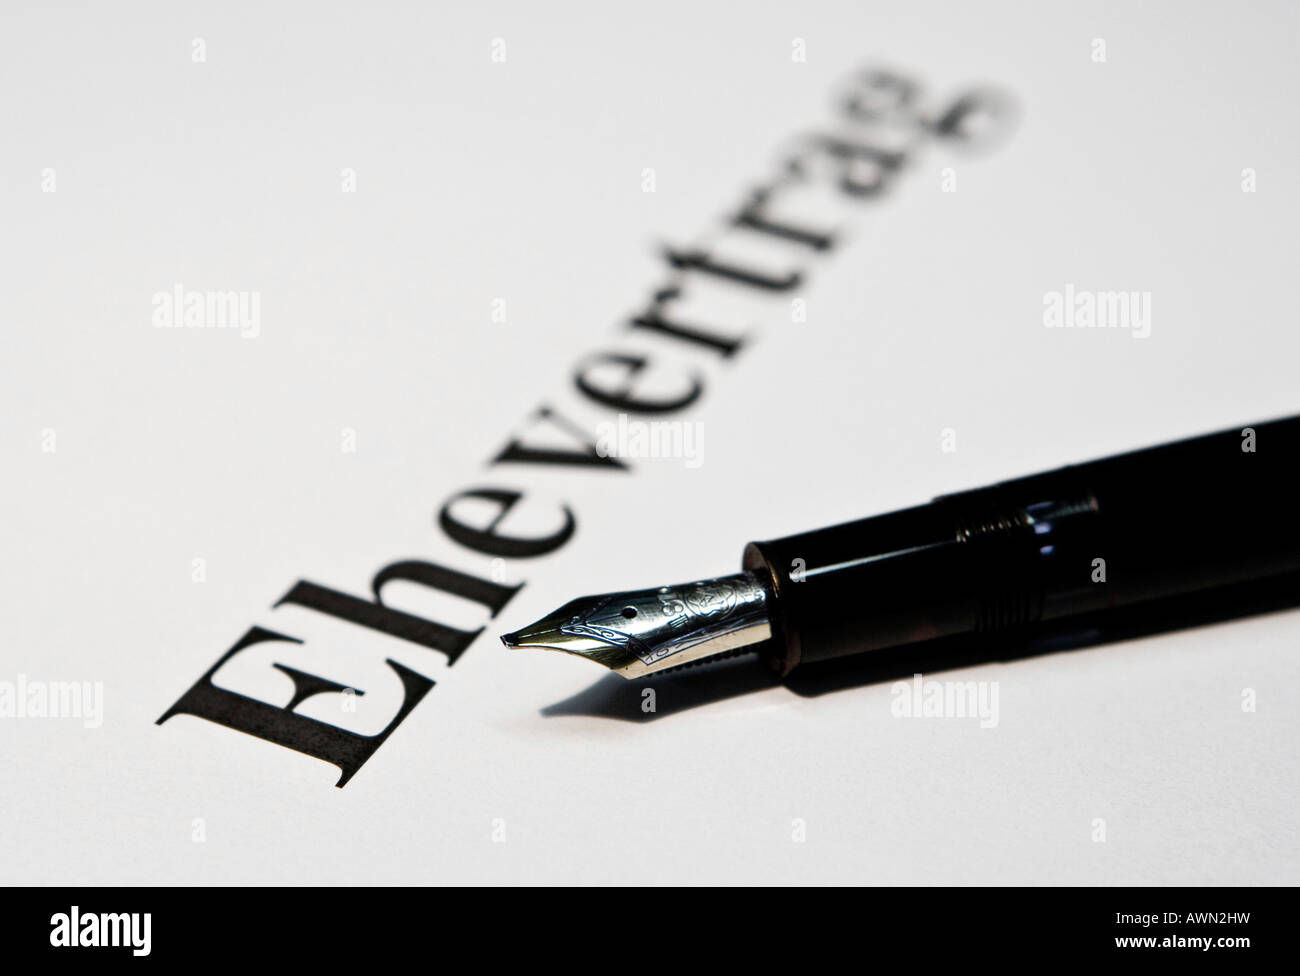 Fountain pen laying on a marital contract Stock Photo